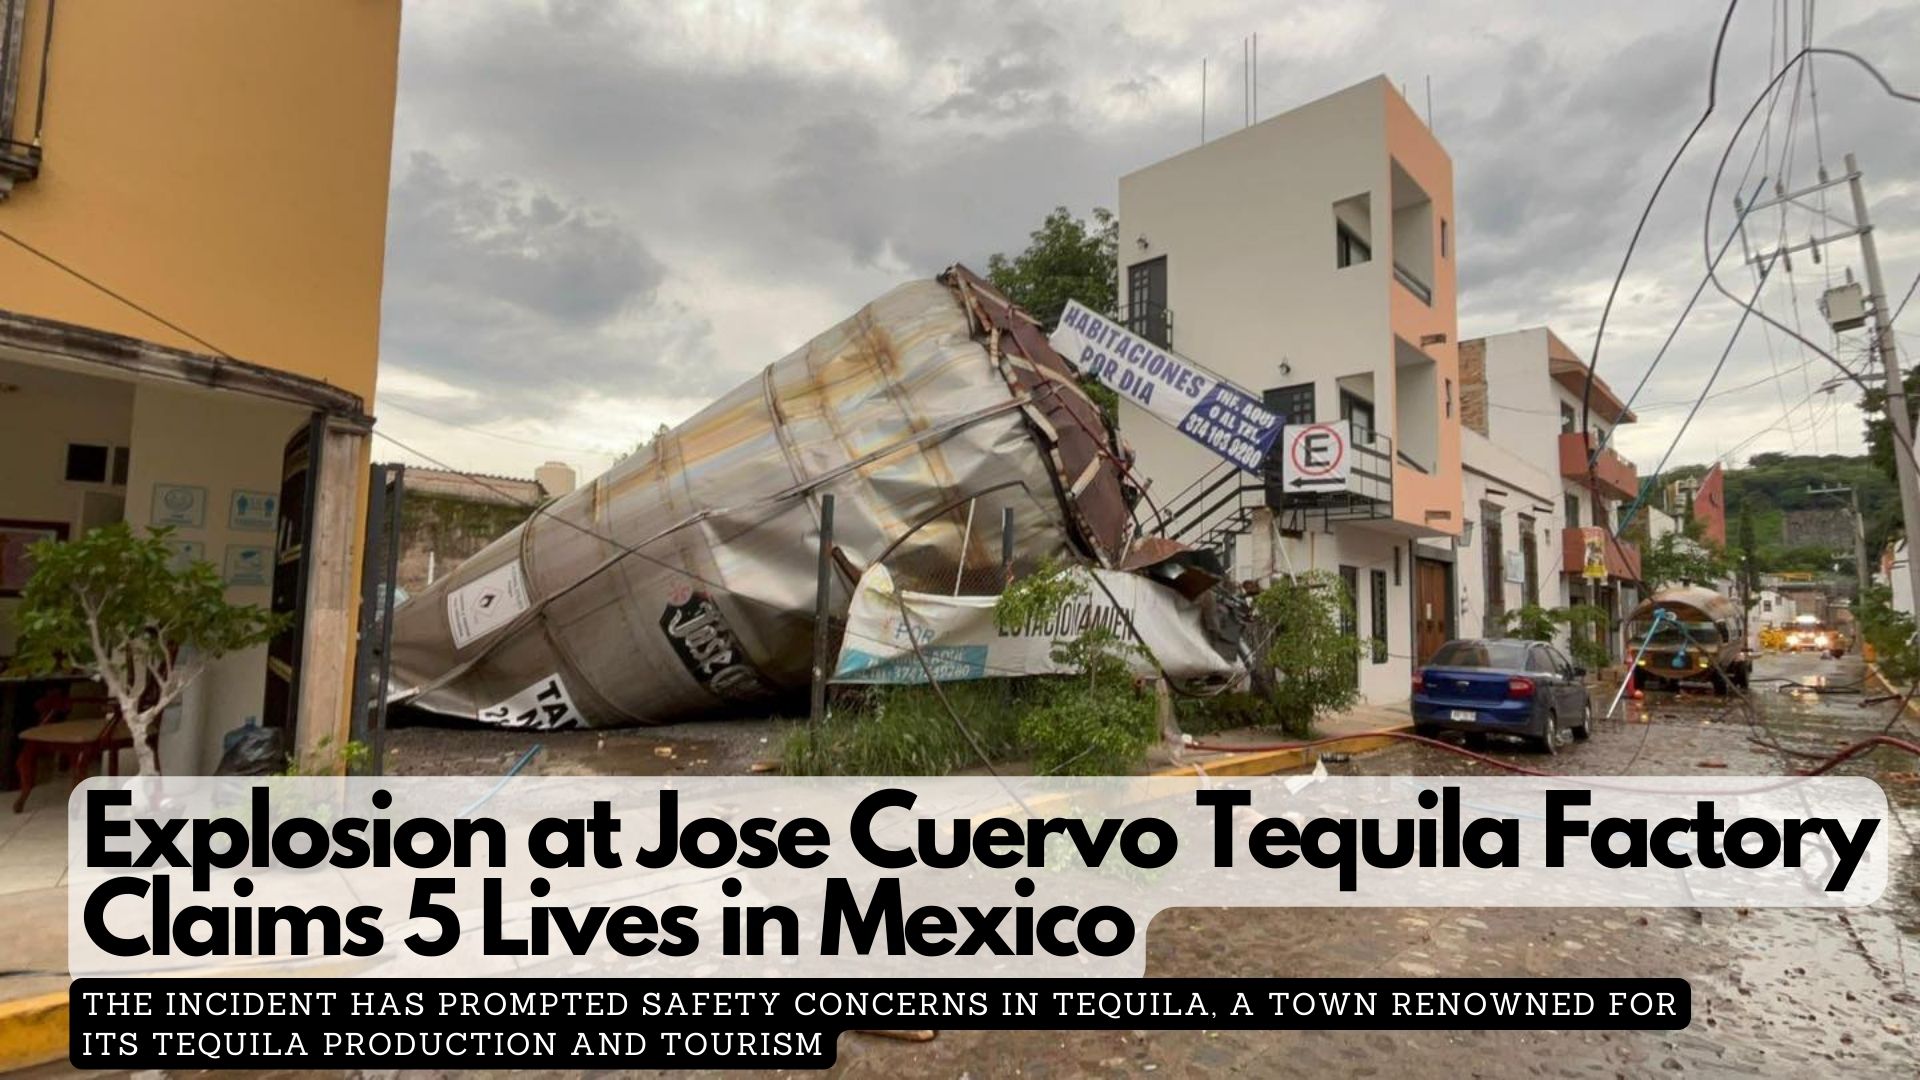 Explosion at Jose Cuervo Tequila Factory Claims 5 Lives in Mexico